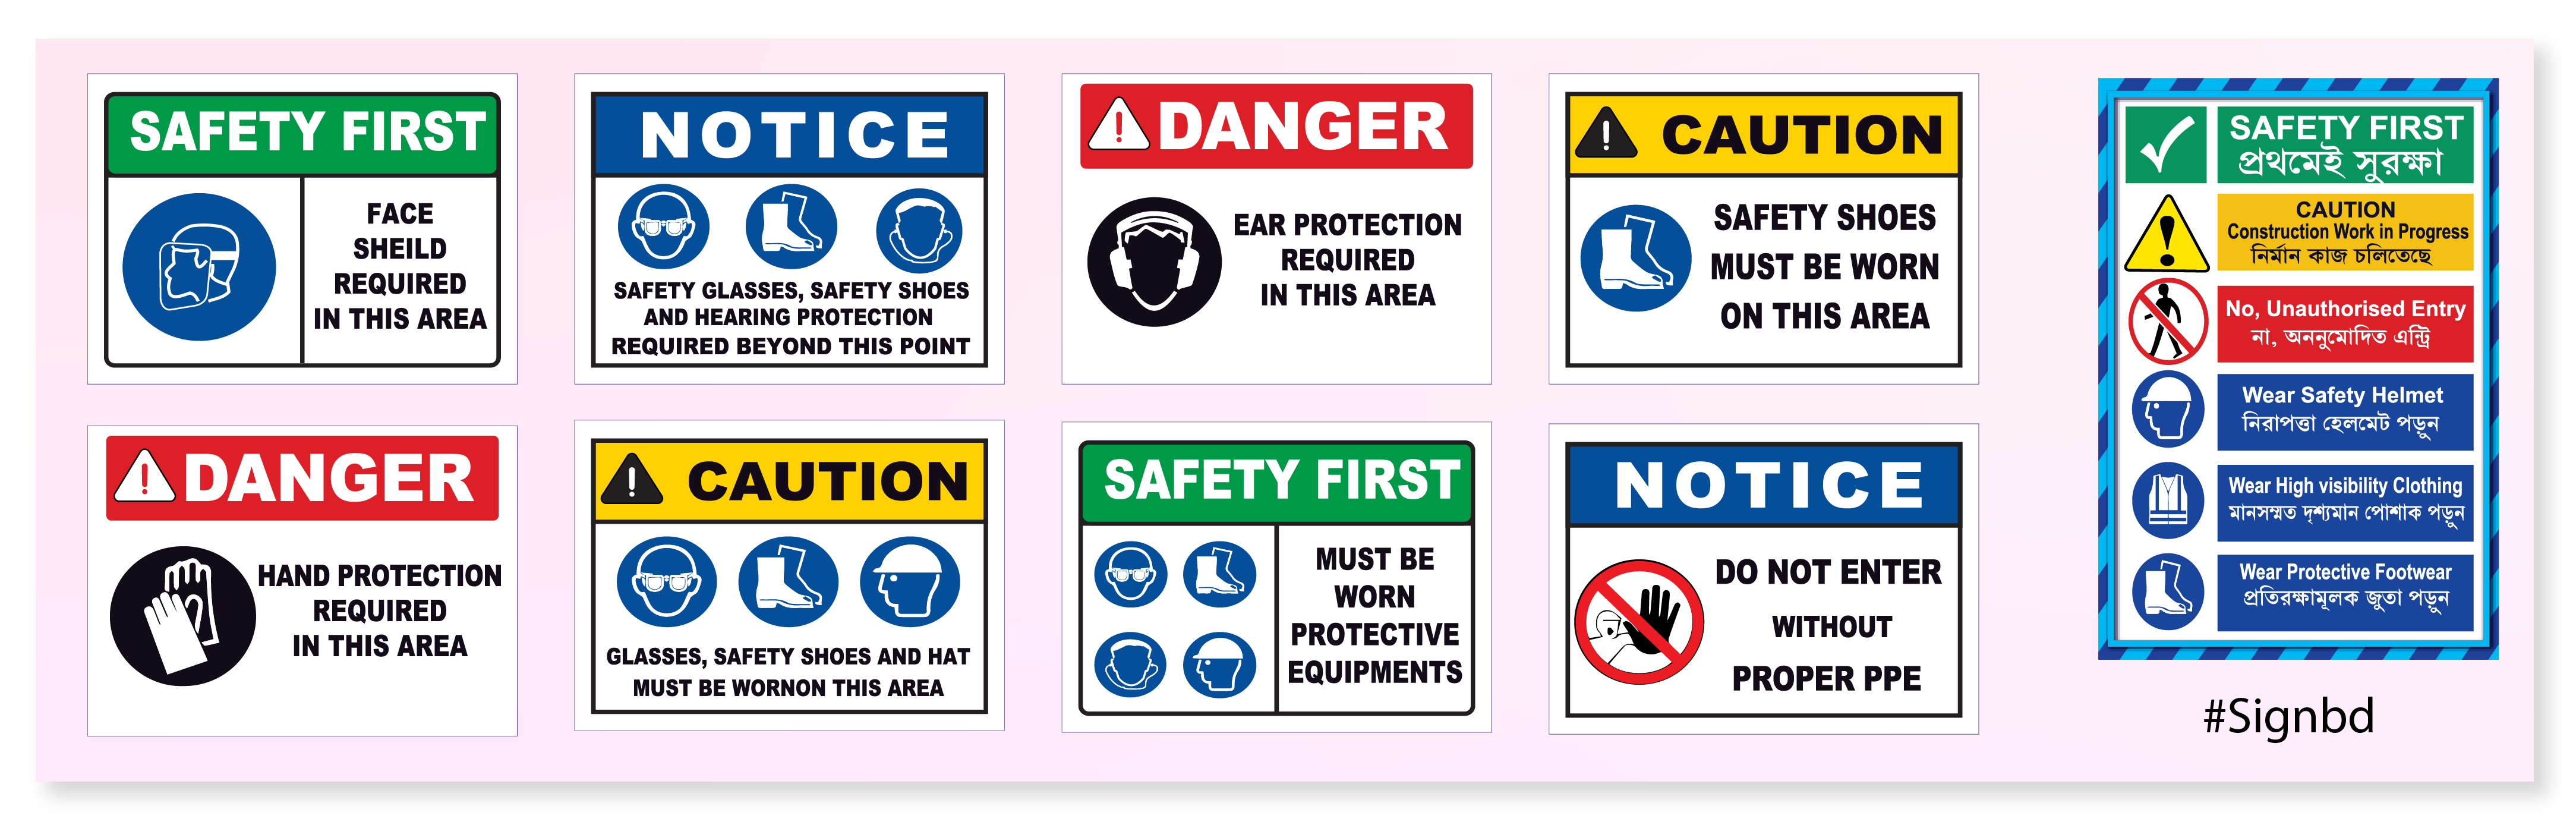 PPE safety sign